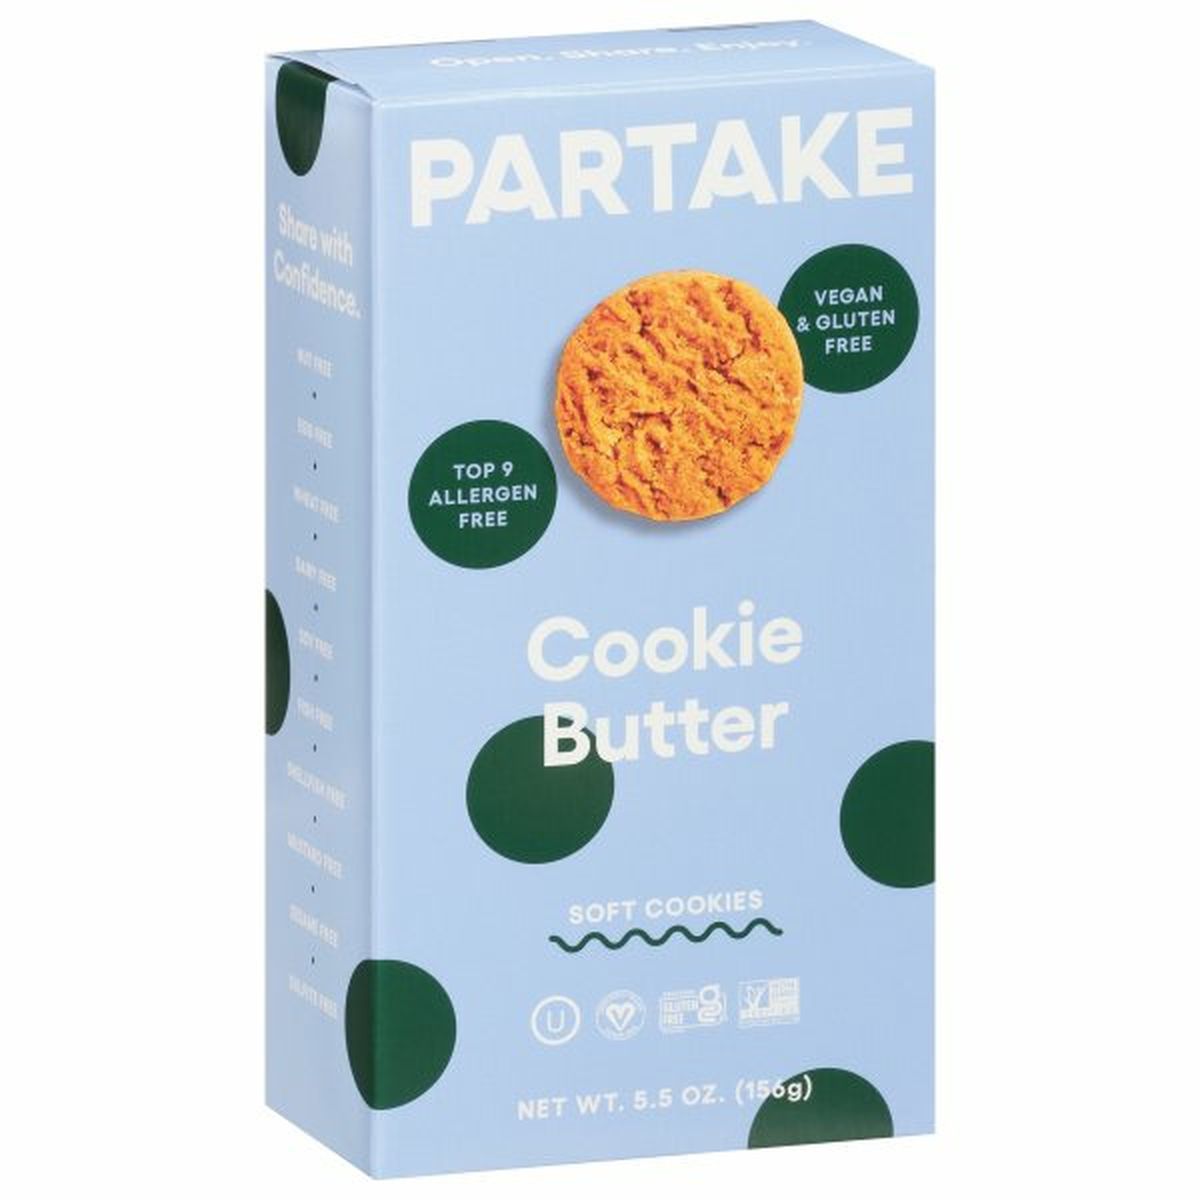 Calories in Partake Foods Cookies, Soft, Cookie Butter